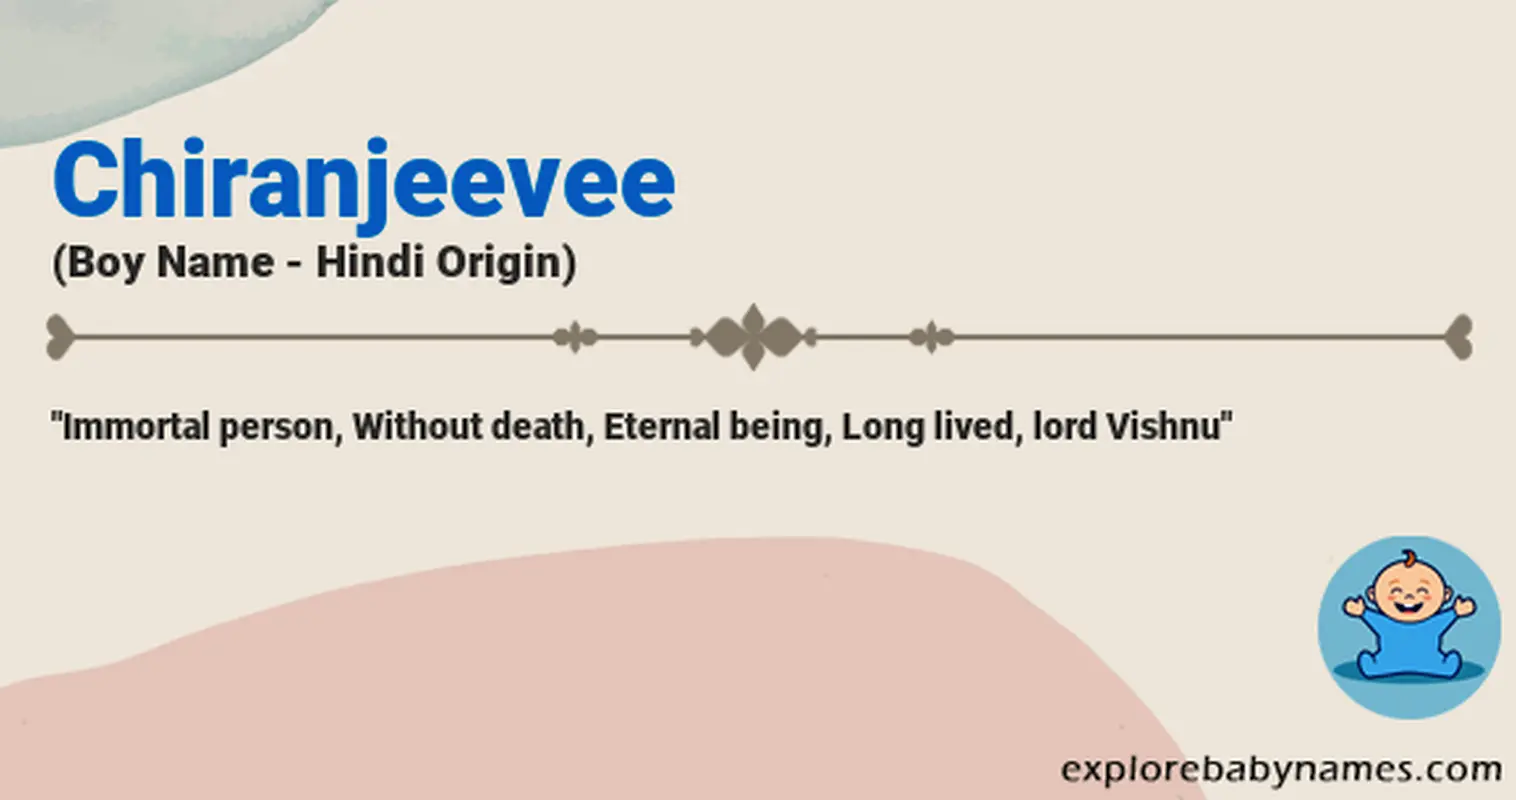 Meaning of Chiranjeevee